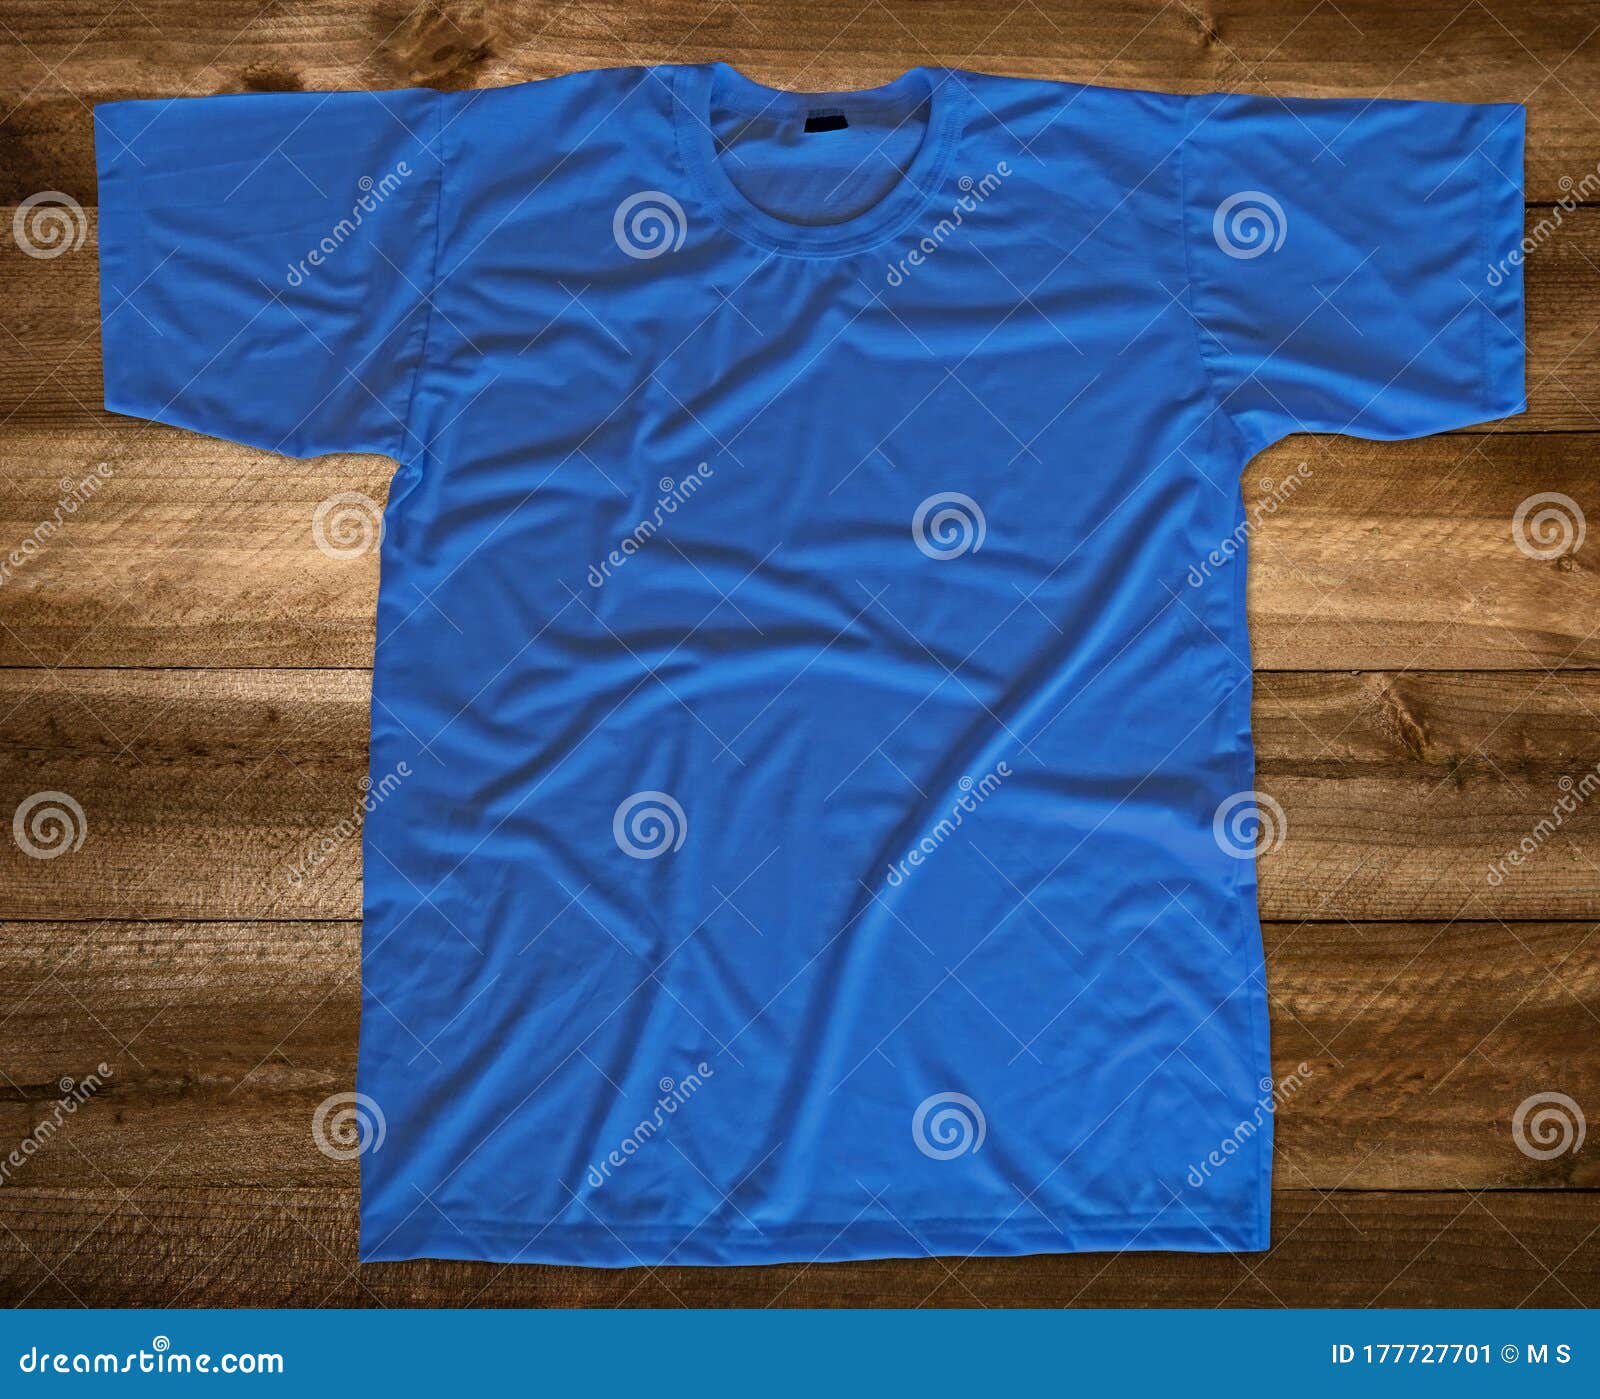 Download 2 312 Blue T Shirt Mockup Photos Free Royalty Free Stock Photos From Dreamstime